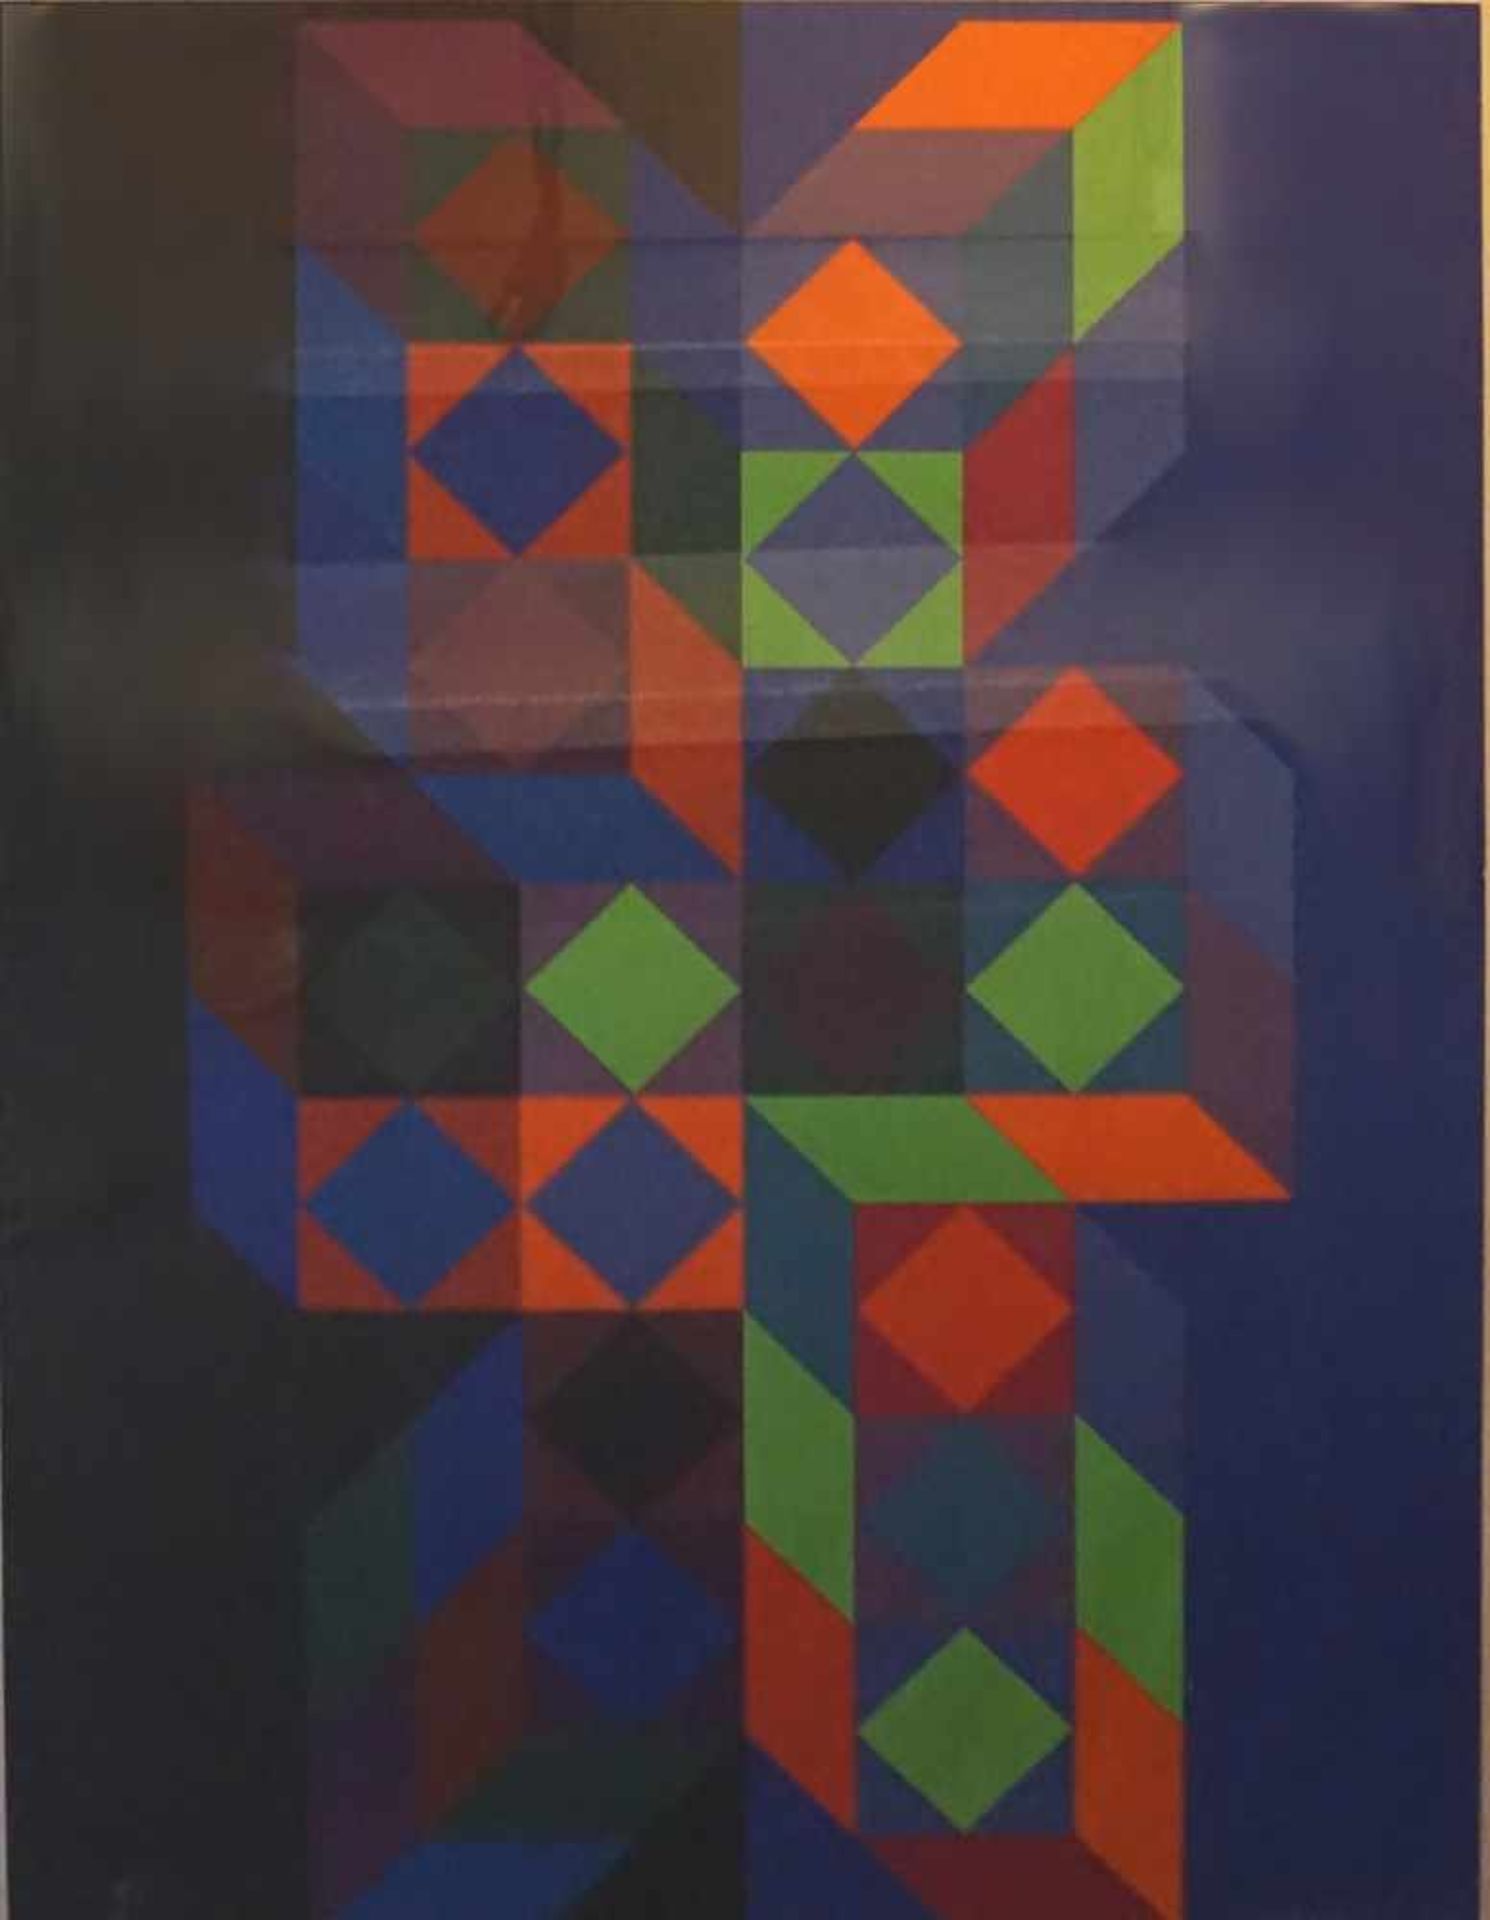 1 Farbserigraphie "Olympia" R. u. in Pl. sign. VASARELY